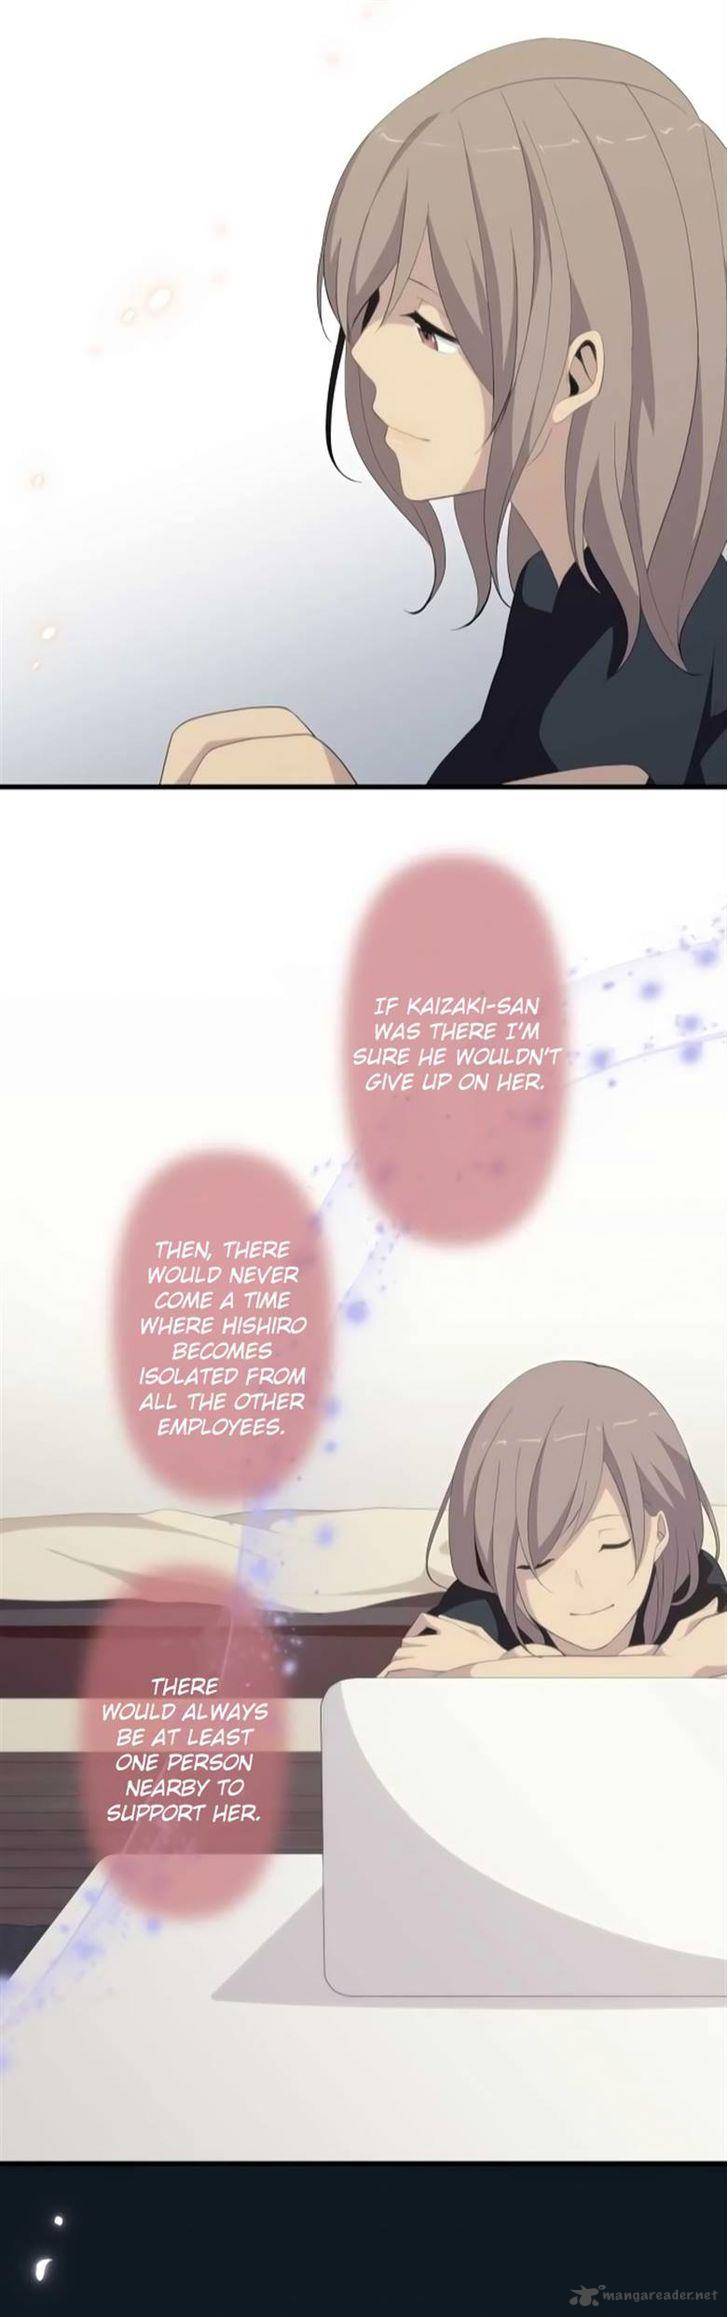 Relife 131 23